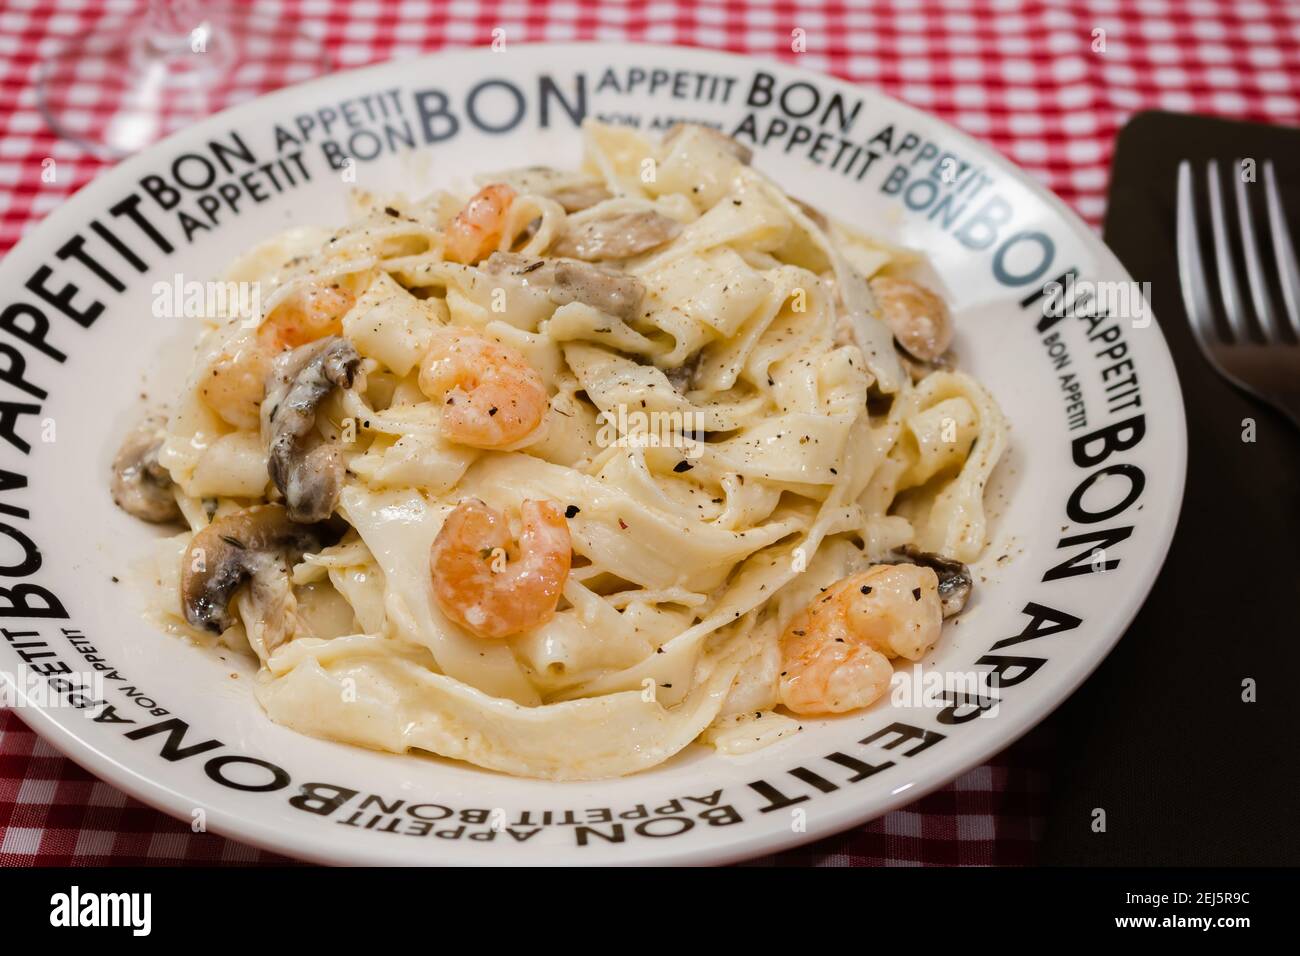 Delicious fettuccine with cream sauce of mushrooms and shrimp on a plate that says Bon Appetite with red checkered tablecloth. Italian cuisine. Stock Photo